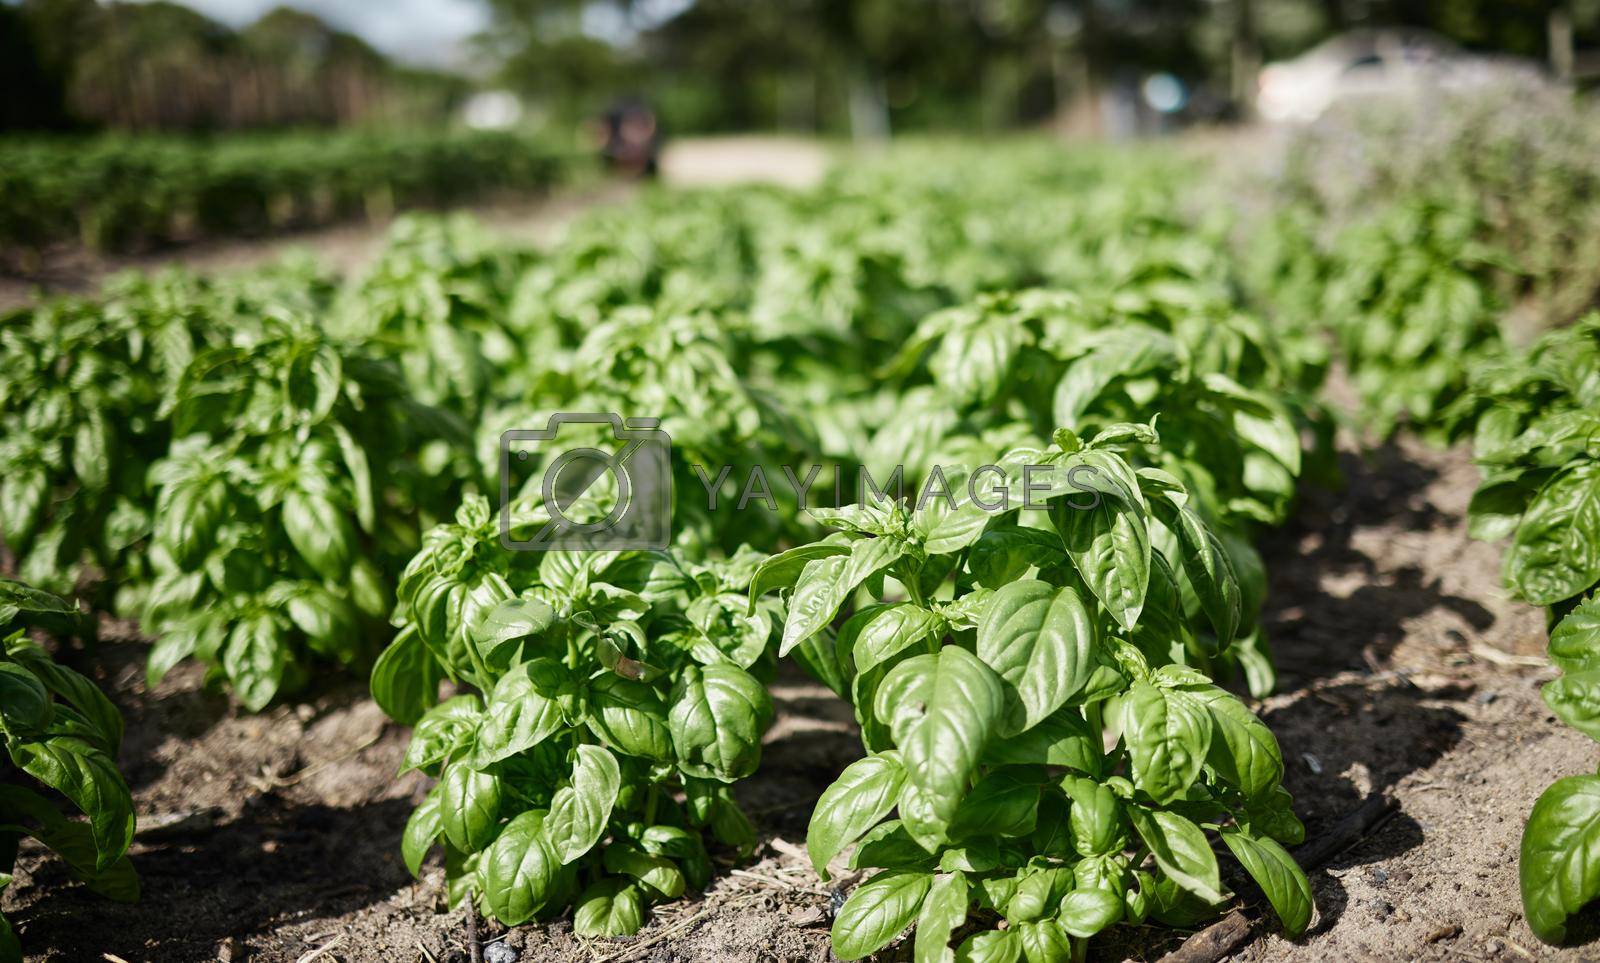 Farm environment, sustainability or plant agriculture in countryside with growth and nature background of healthy spinach plants. Vegetable garden landscape in spring with natural green land or field.